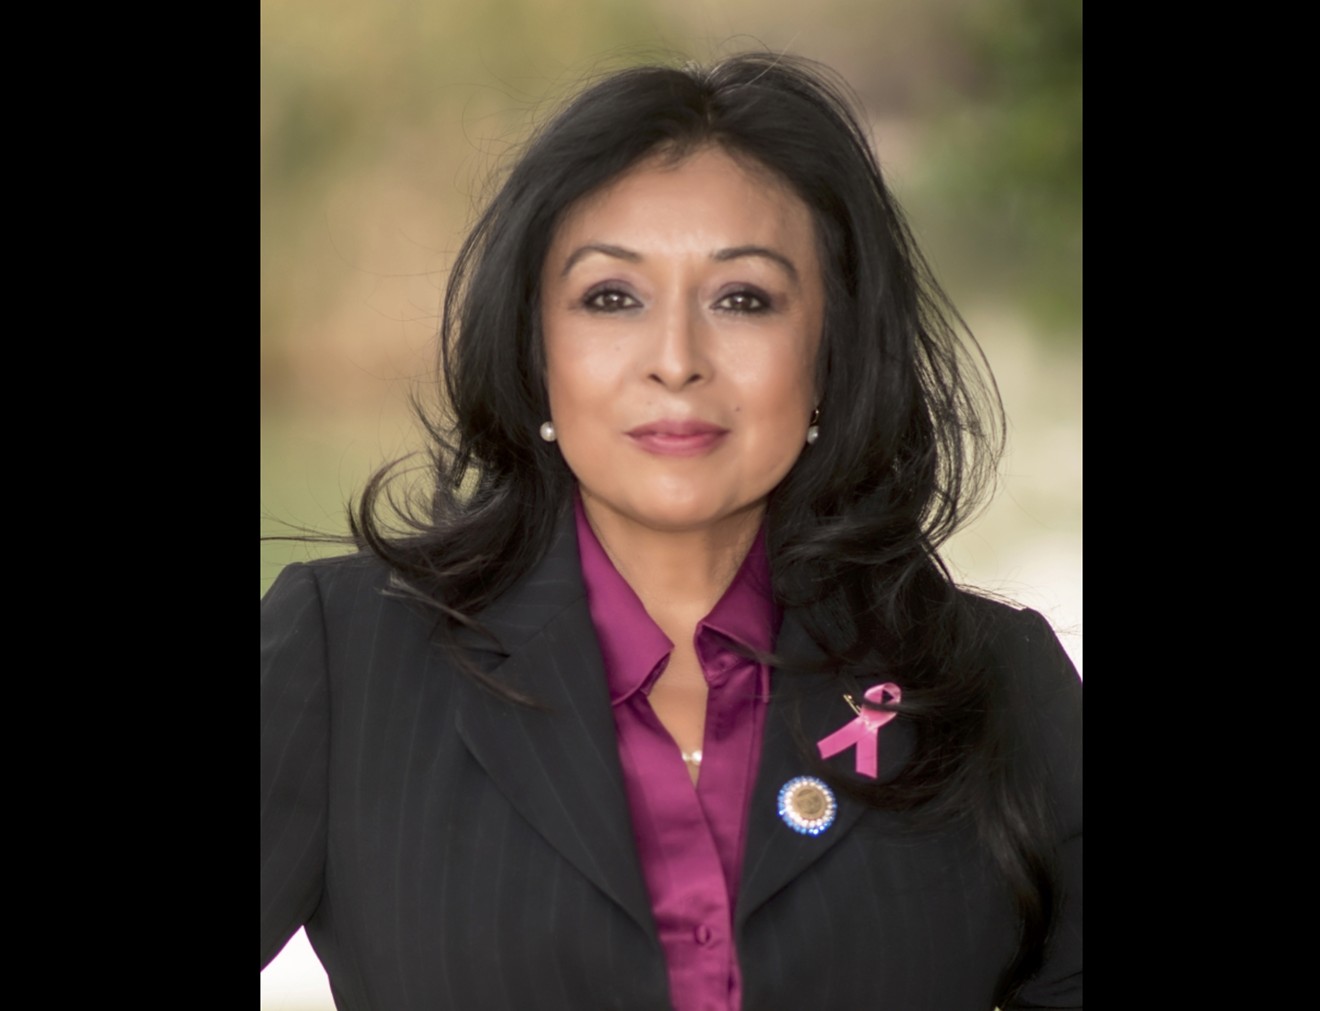 Lydia Hernandez is running for Phoenix City Council in District 5. Her visit to a Texas education association brought controversy and a two-year ban from the group's events.